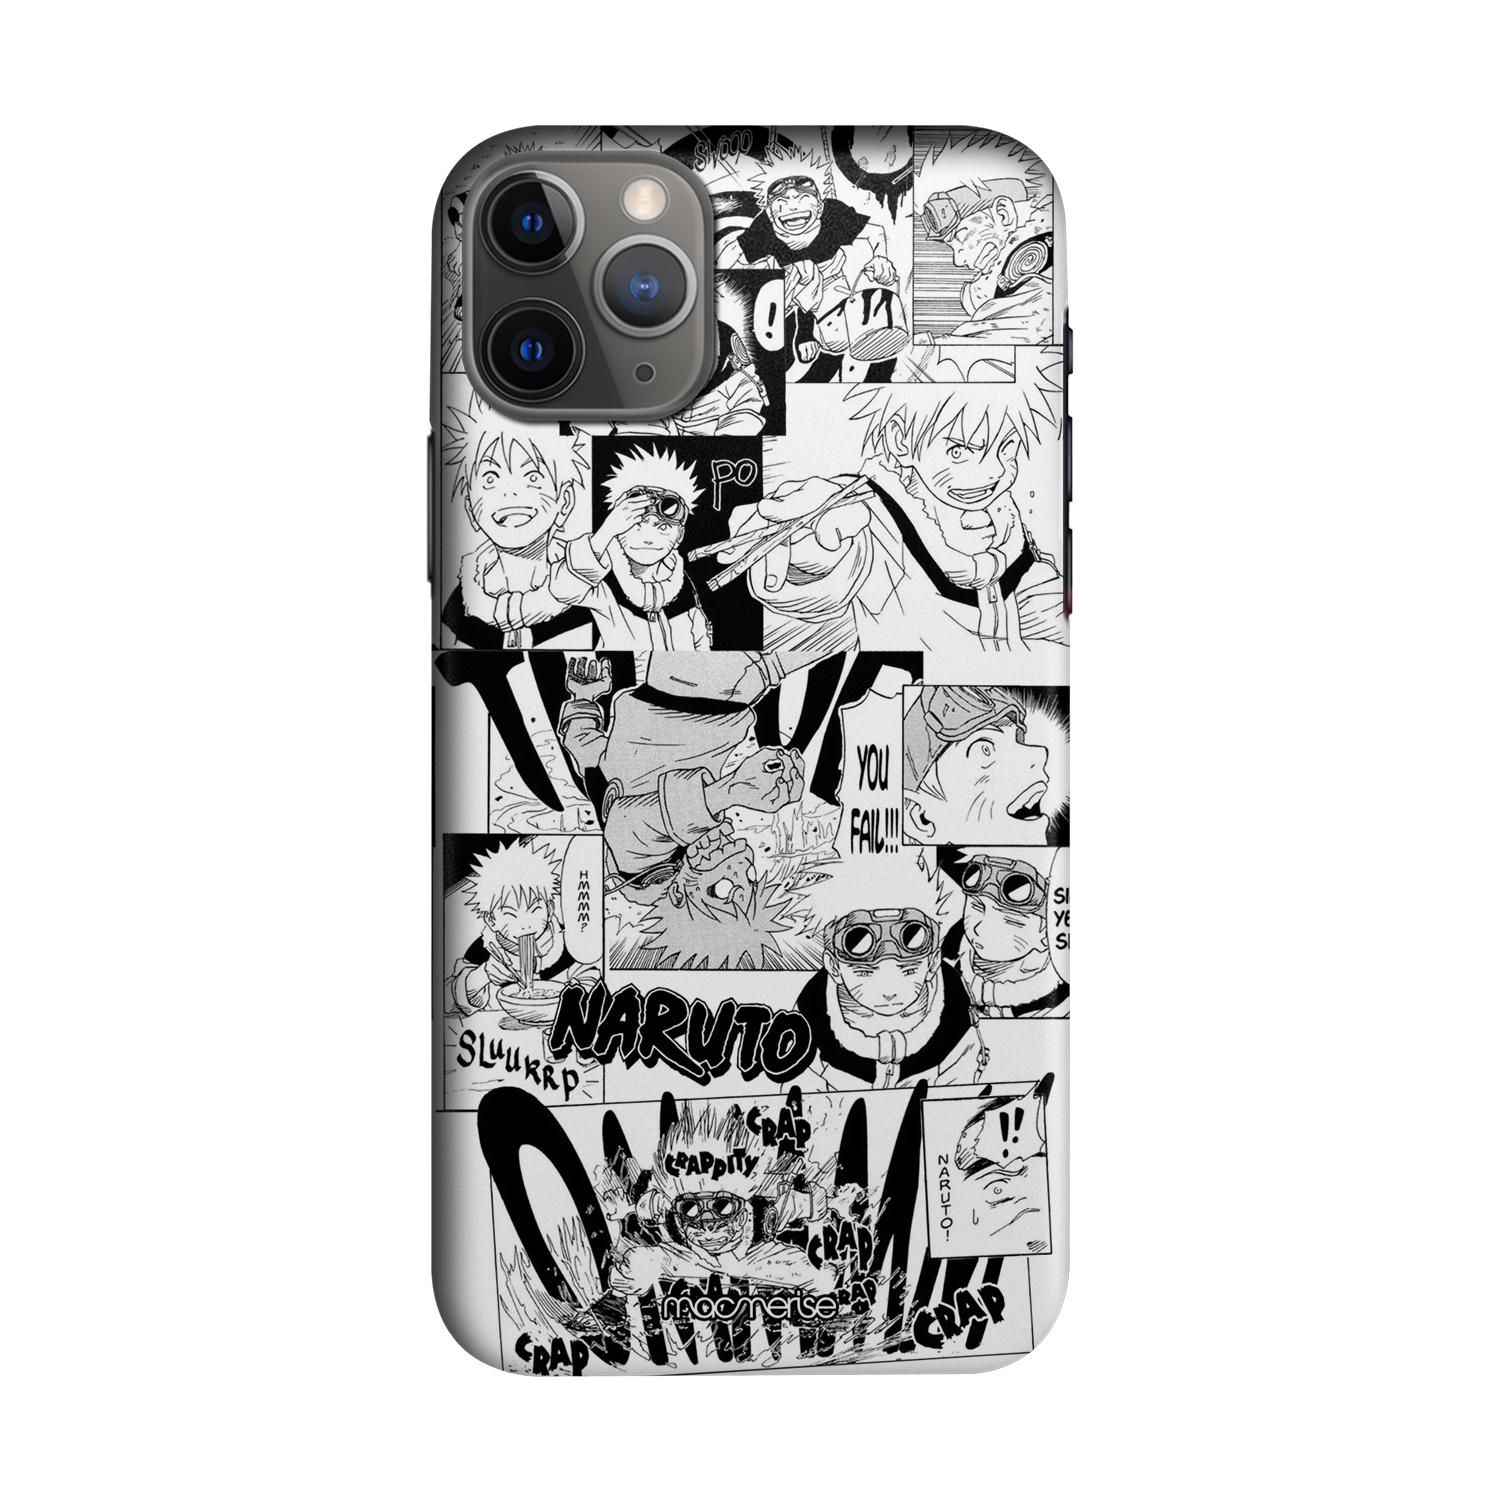 Buy Naruto Collage - Sleek Phone Case for iPhone 11 Pro Max Online